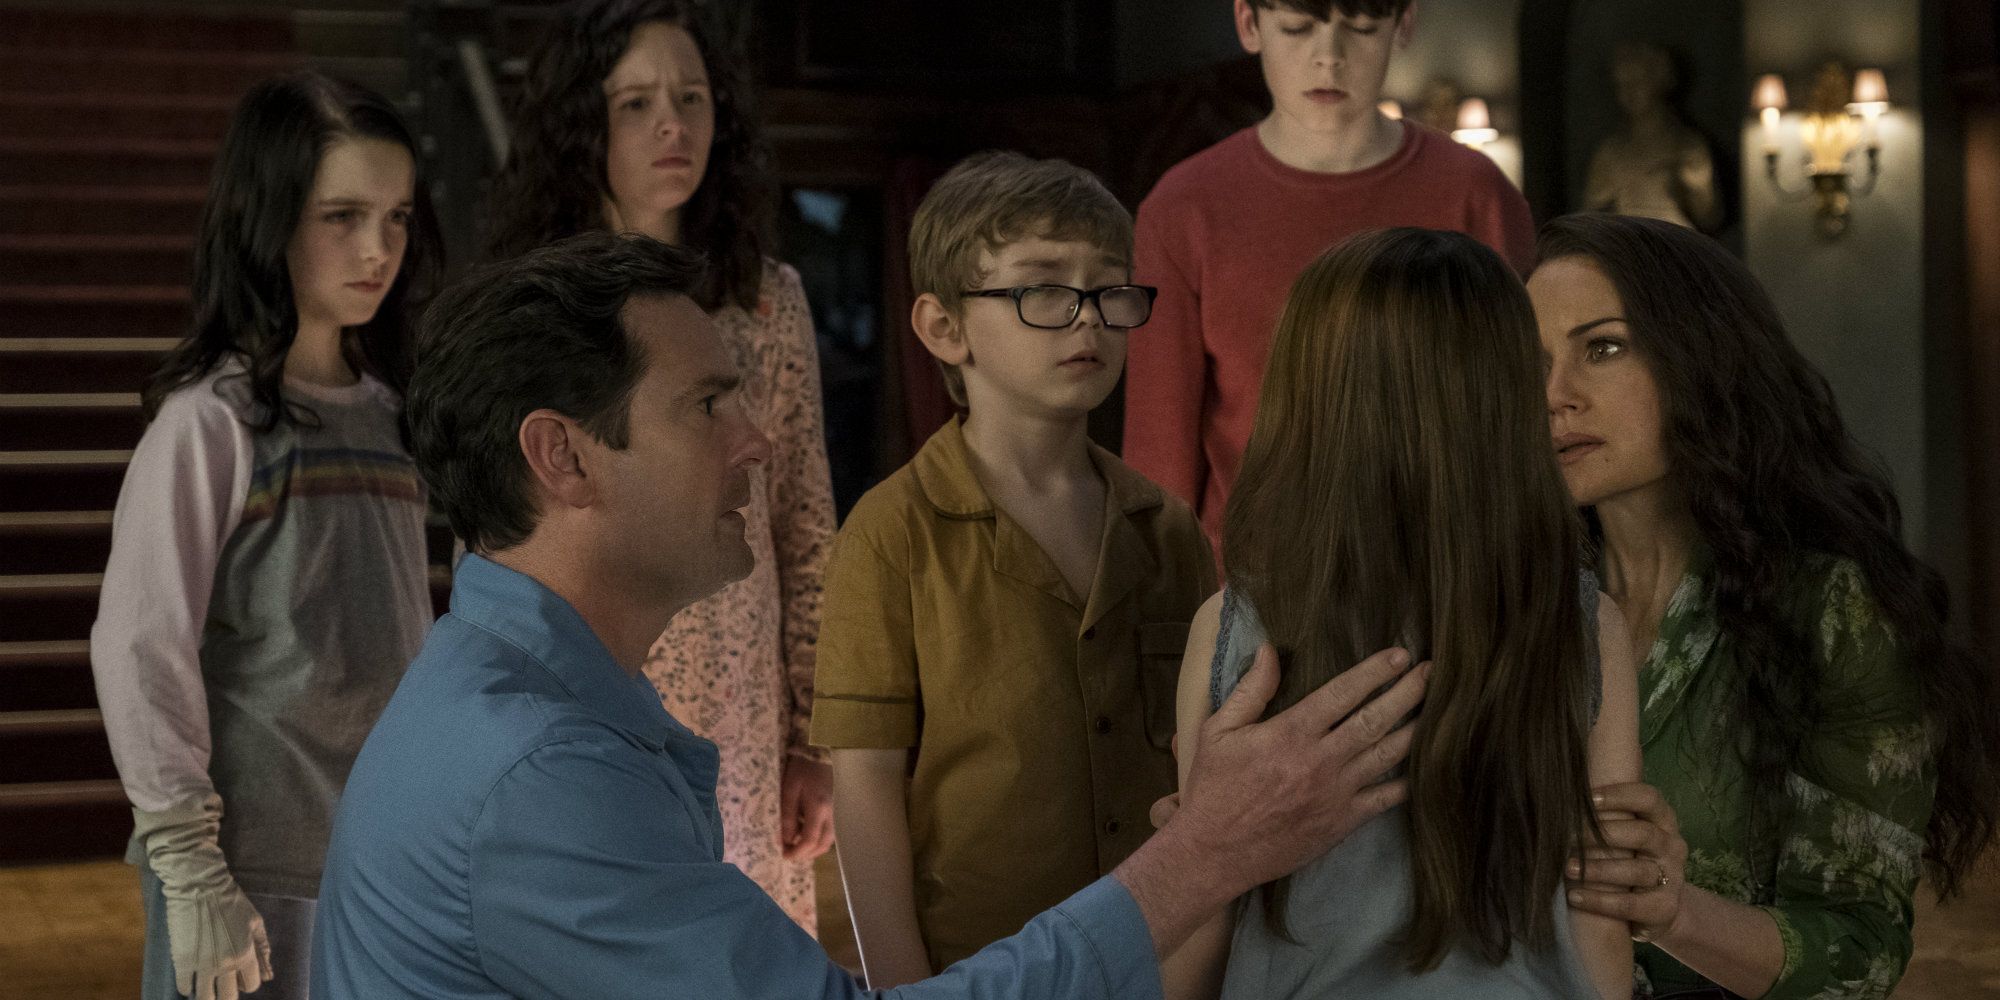 The Crain family in The Haunting of Hill House